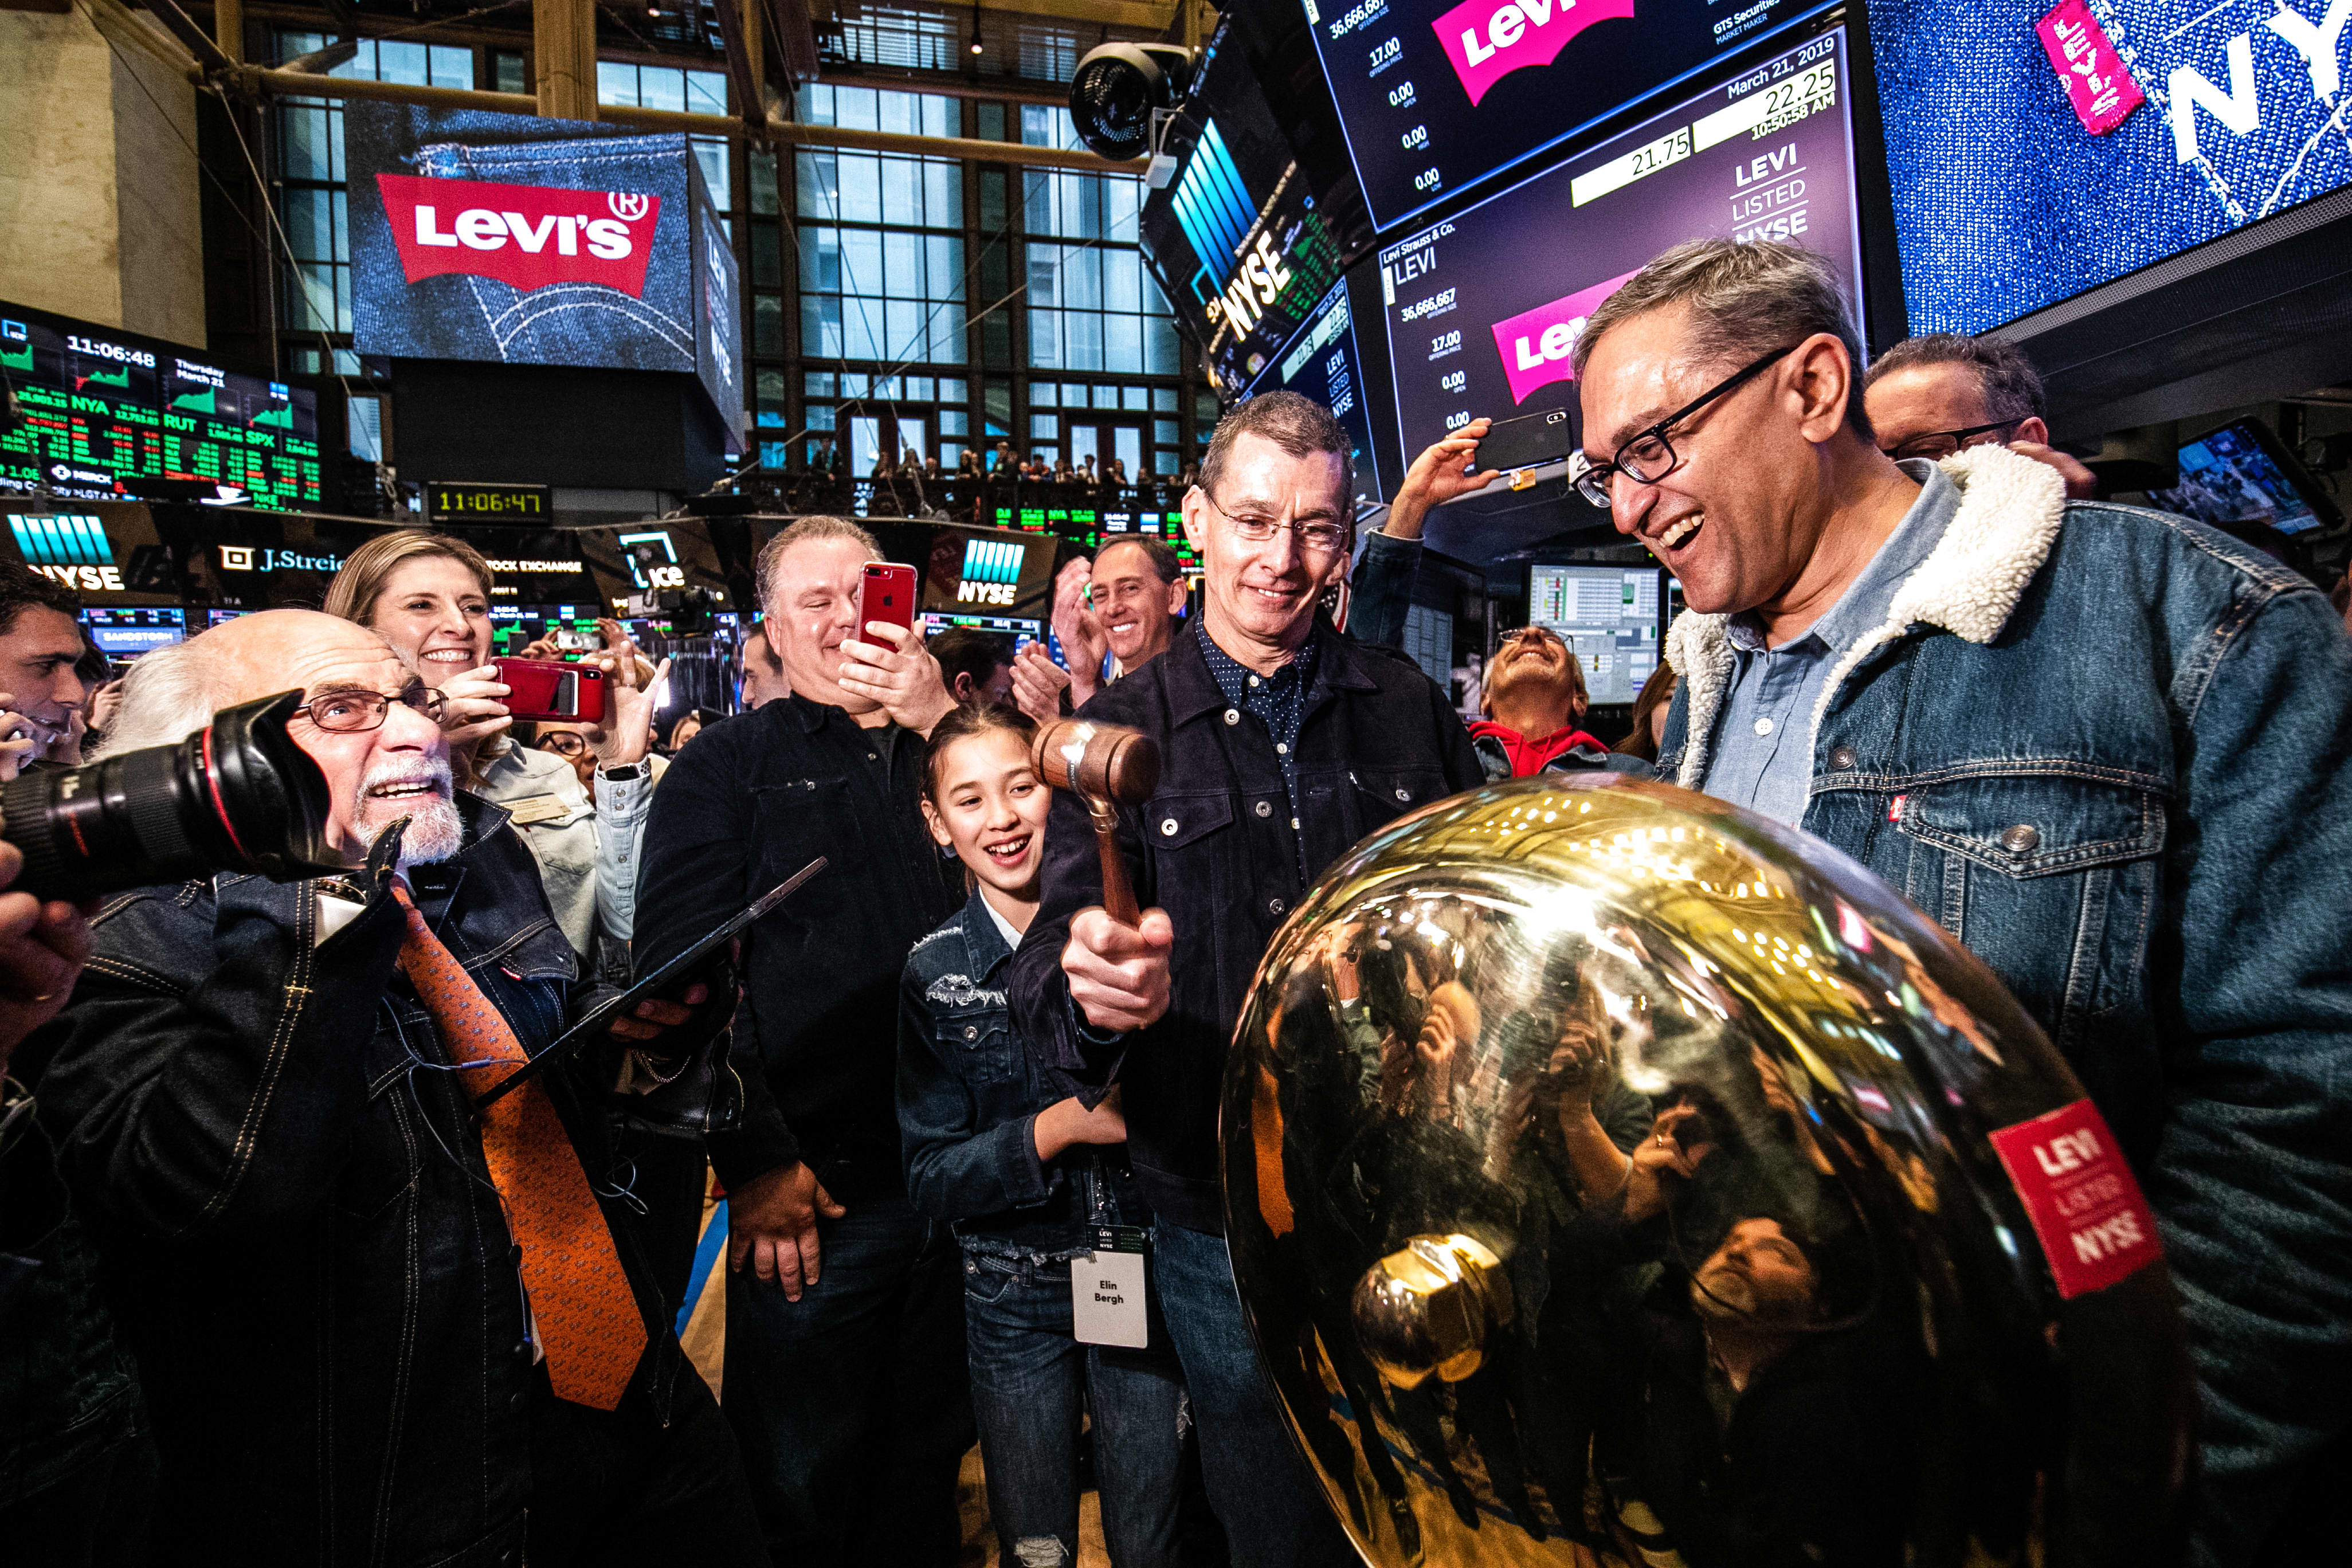 Levi Strauss shares open at $22.22 in IPO